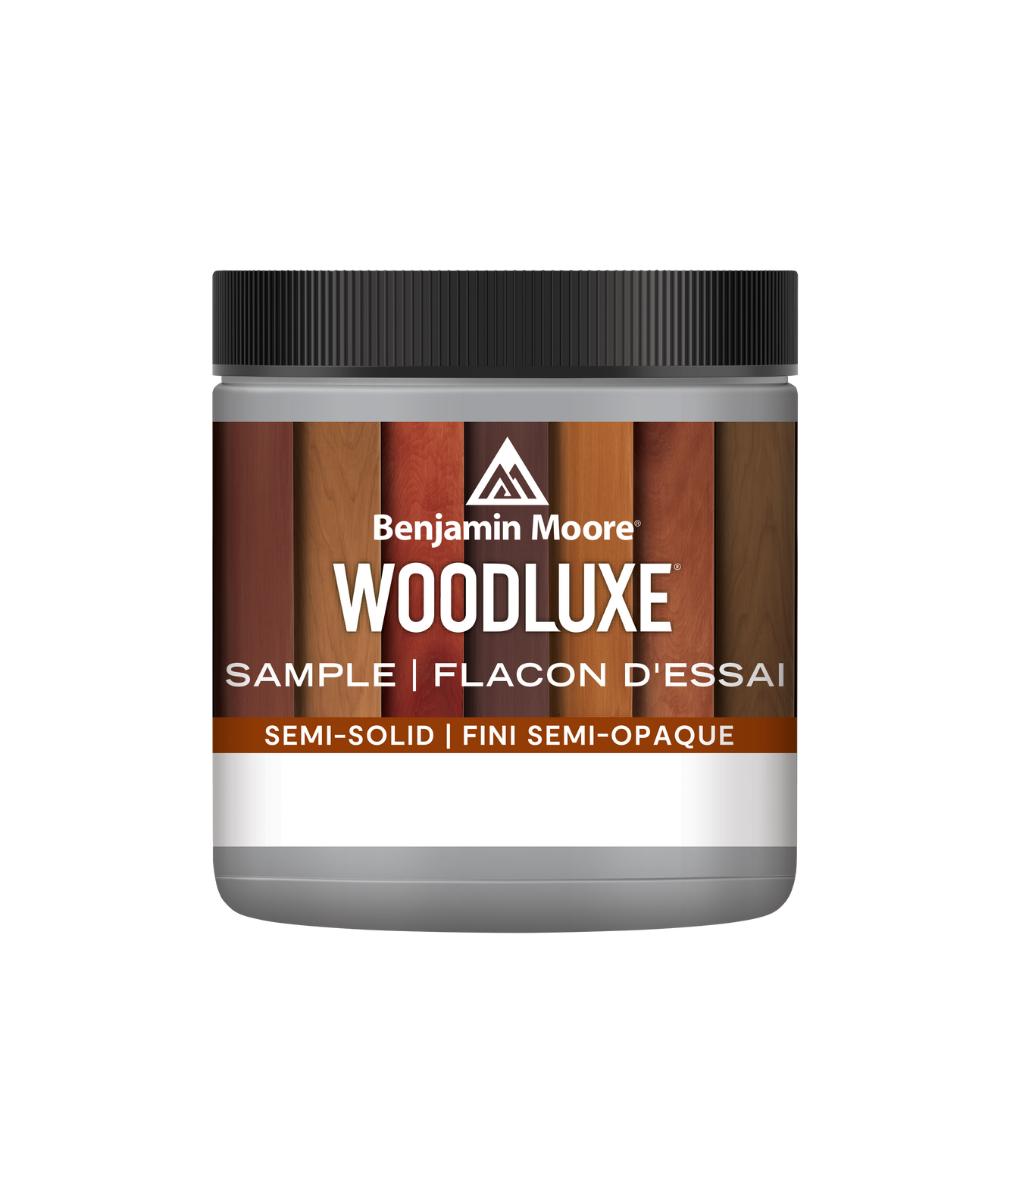 Benjamin Moore Woodluxe® Water-Based Semi-Solid Exterior Stain Half Pint Sample available to shop at Regal Paint Centers in Maryland, Virginia and DC.